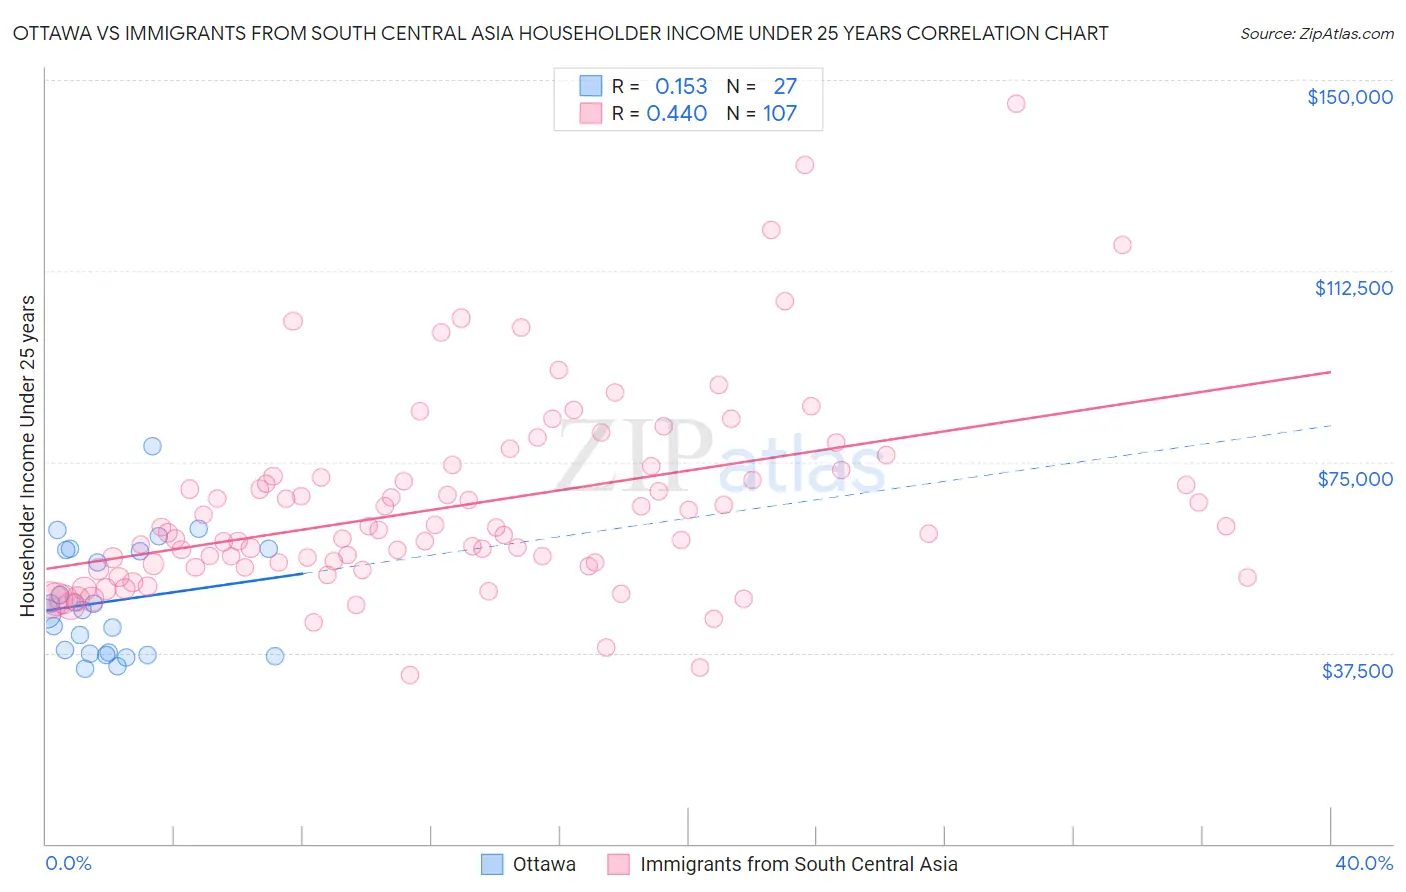 Ottawa vs Immigrants from South Central Asia Householder Income Under 25 years